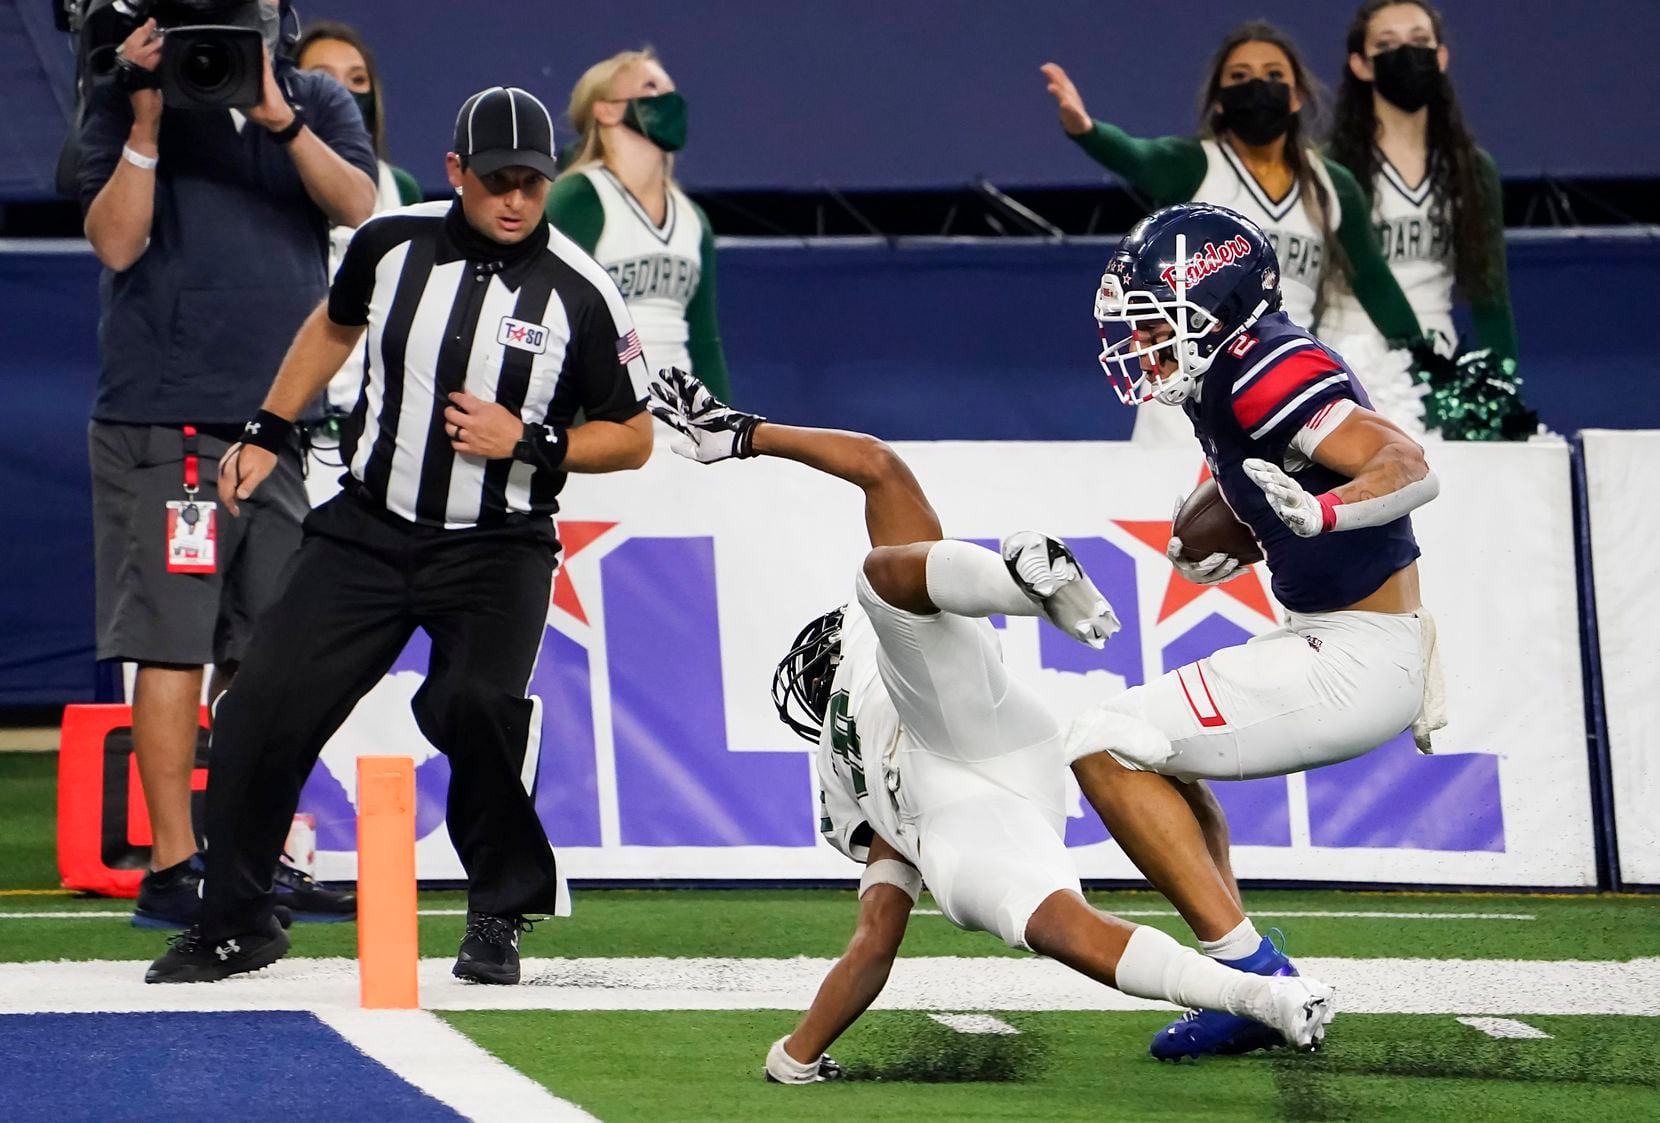 Denton Ryan Billy Bowman Jr. (2) slips past Cedar Park defensive back Michael Putney (6) to score on a hauls in a 37-yard touchdown pass from quarterback Seth Henigan during the first half of the Class 5A Division I state football championship game at AT&T Stadium on Friday, Jan. 15, 2021, in Arlington, Texas. (Smiley N. Pool/The Dallas Morning News)